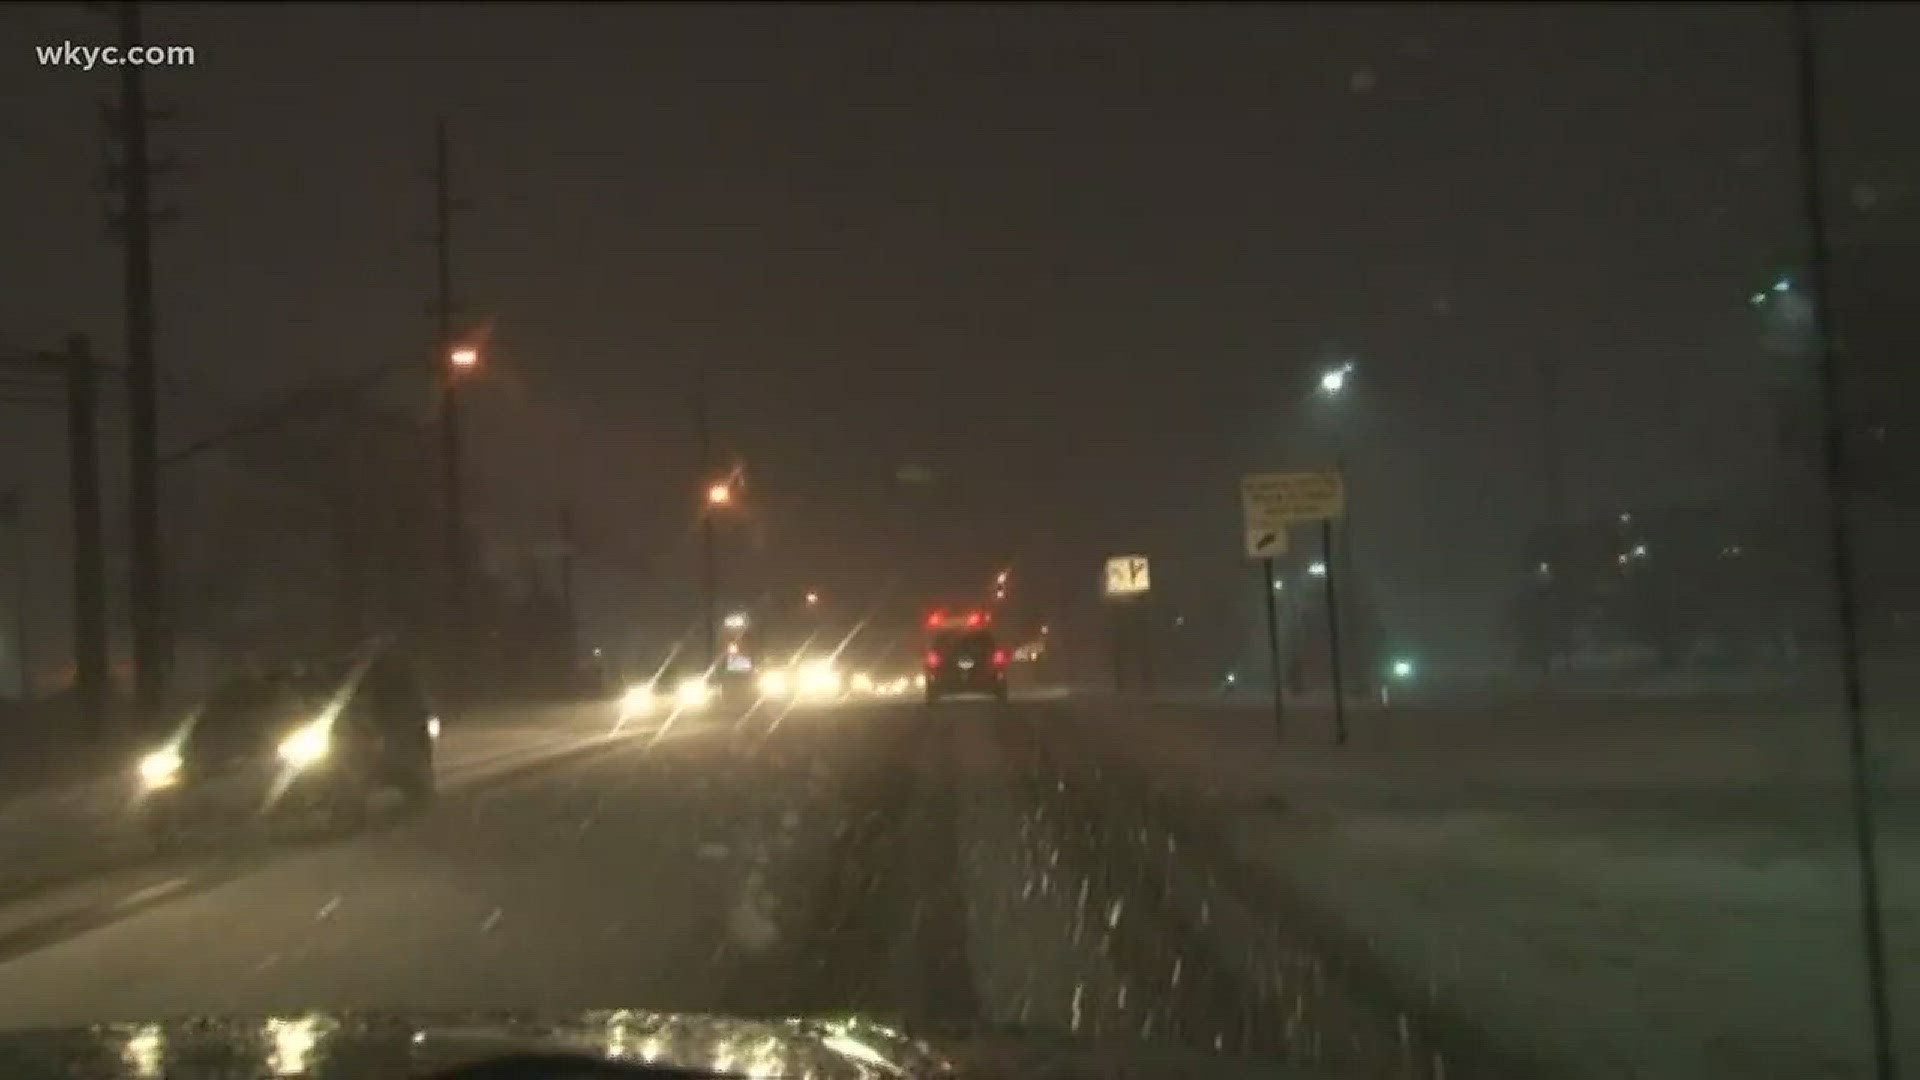 More snow is sticking to the roadways in Chardon as of 6:30 a.m. WKYC's Will Ujek gives us a glimpse at the traffic conditions.